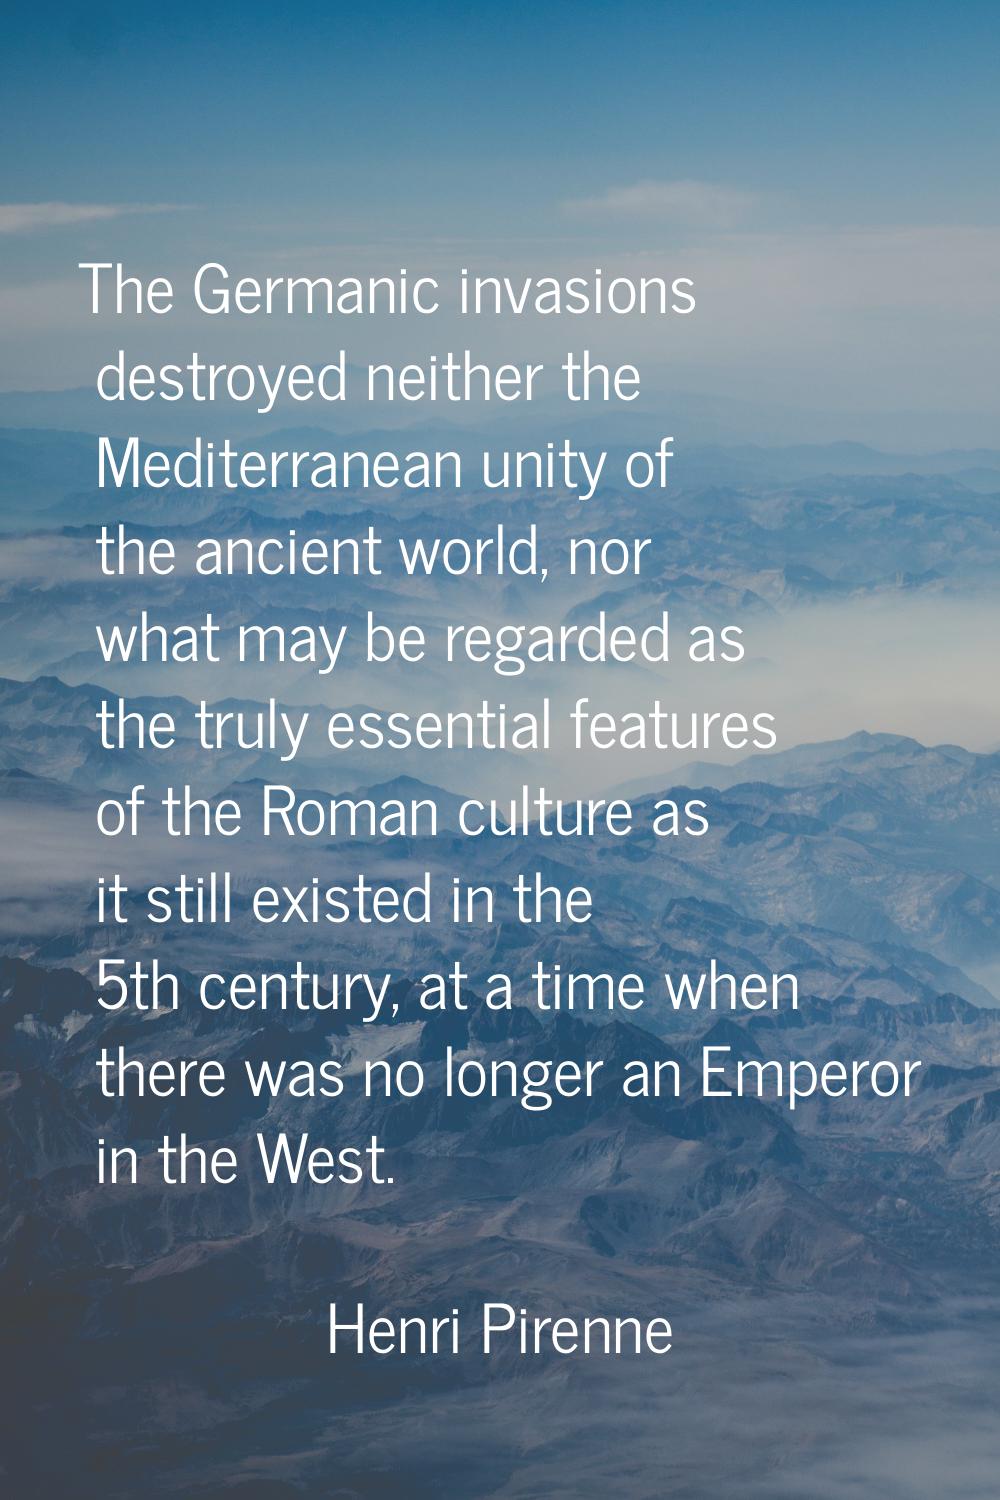 The Germanic invasions destroyed neither the Mediterranean unity of the ancient world, nor what may